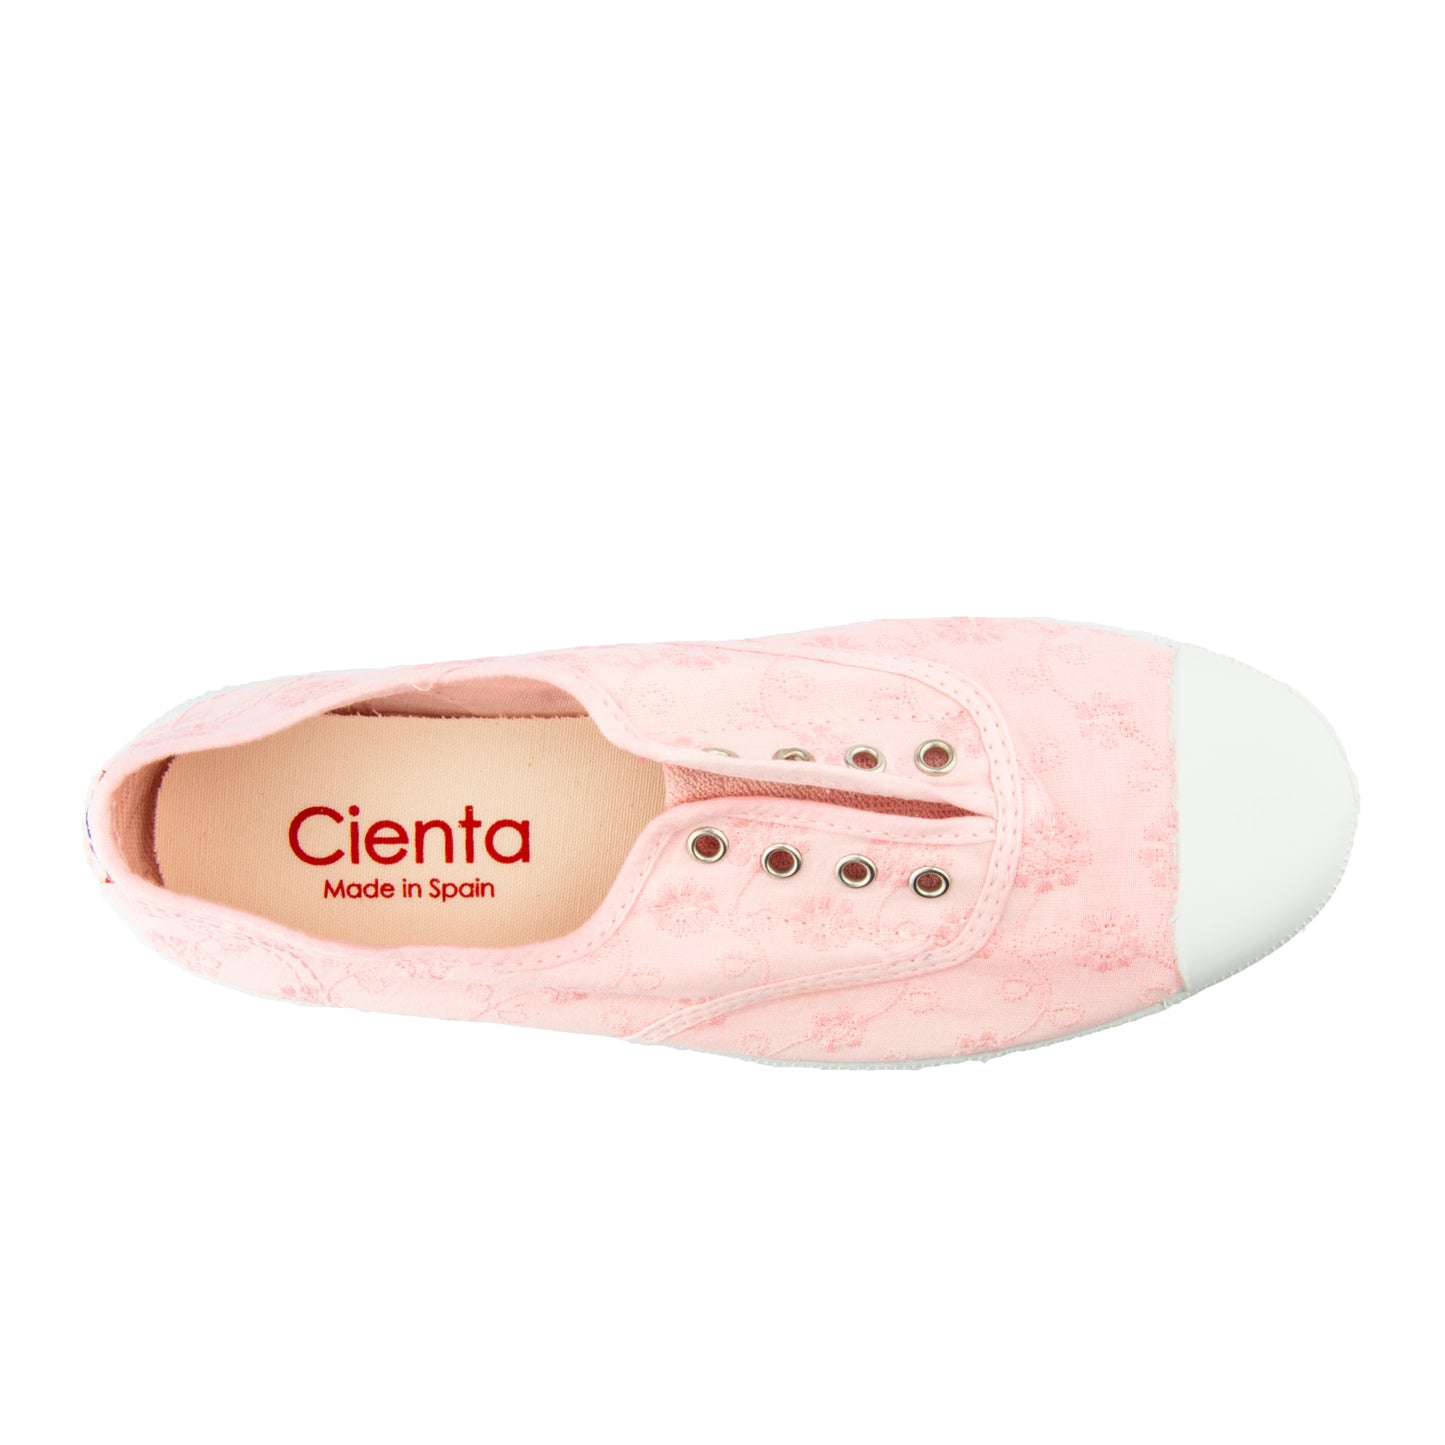 Cienta Embroidered Shoes / 70998-41-A